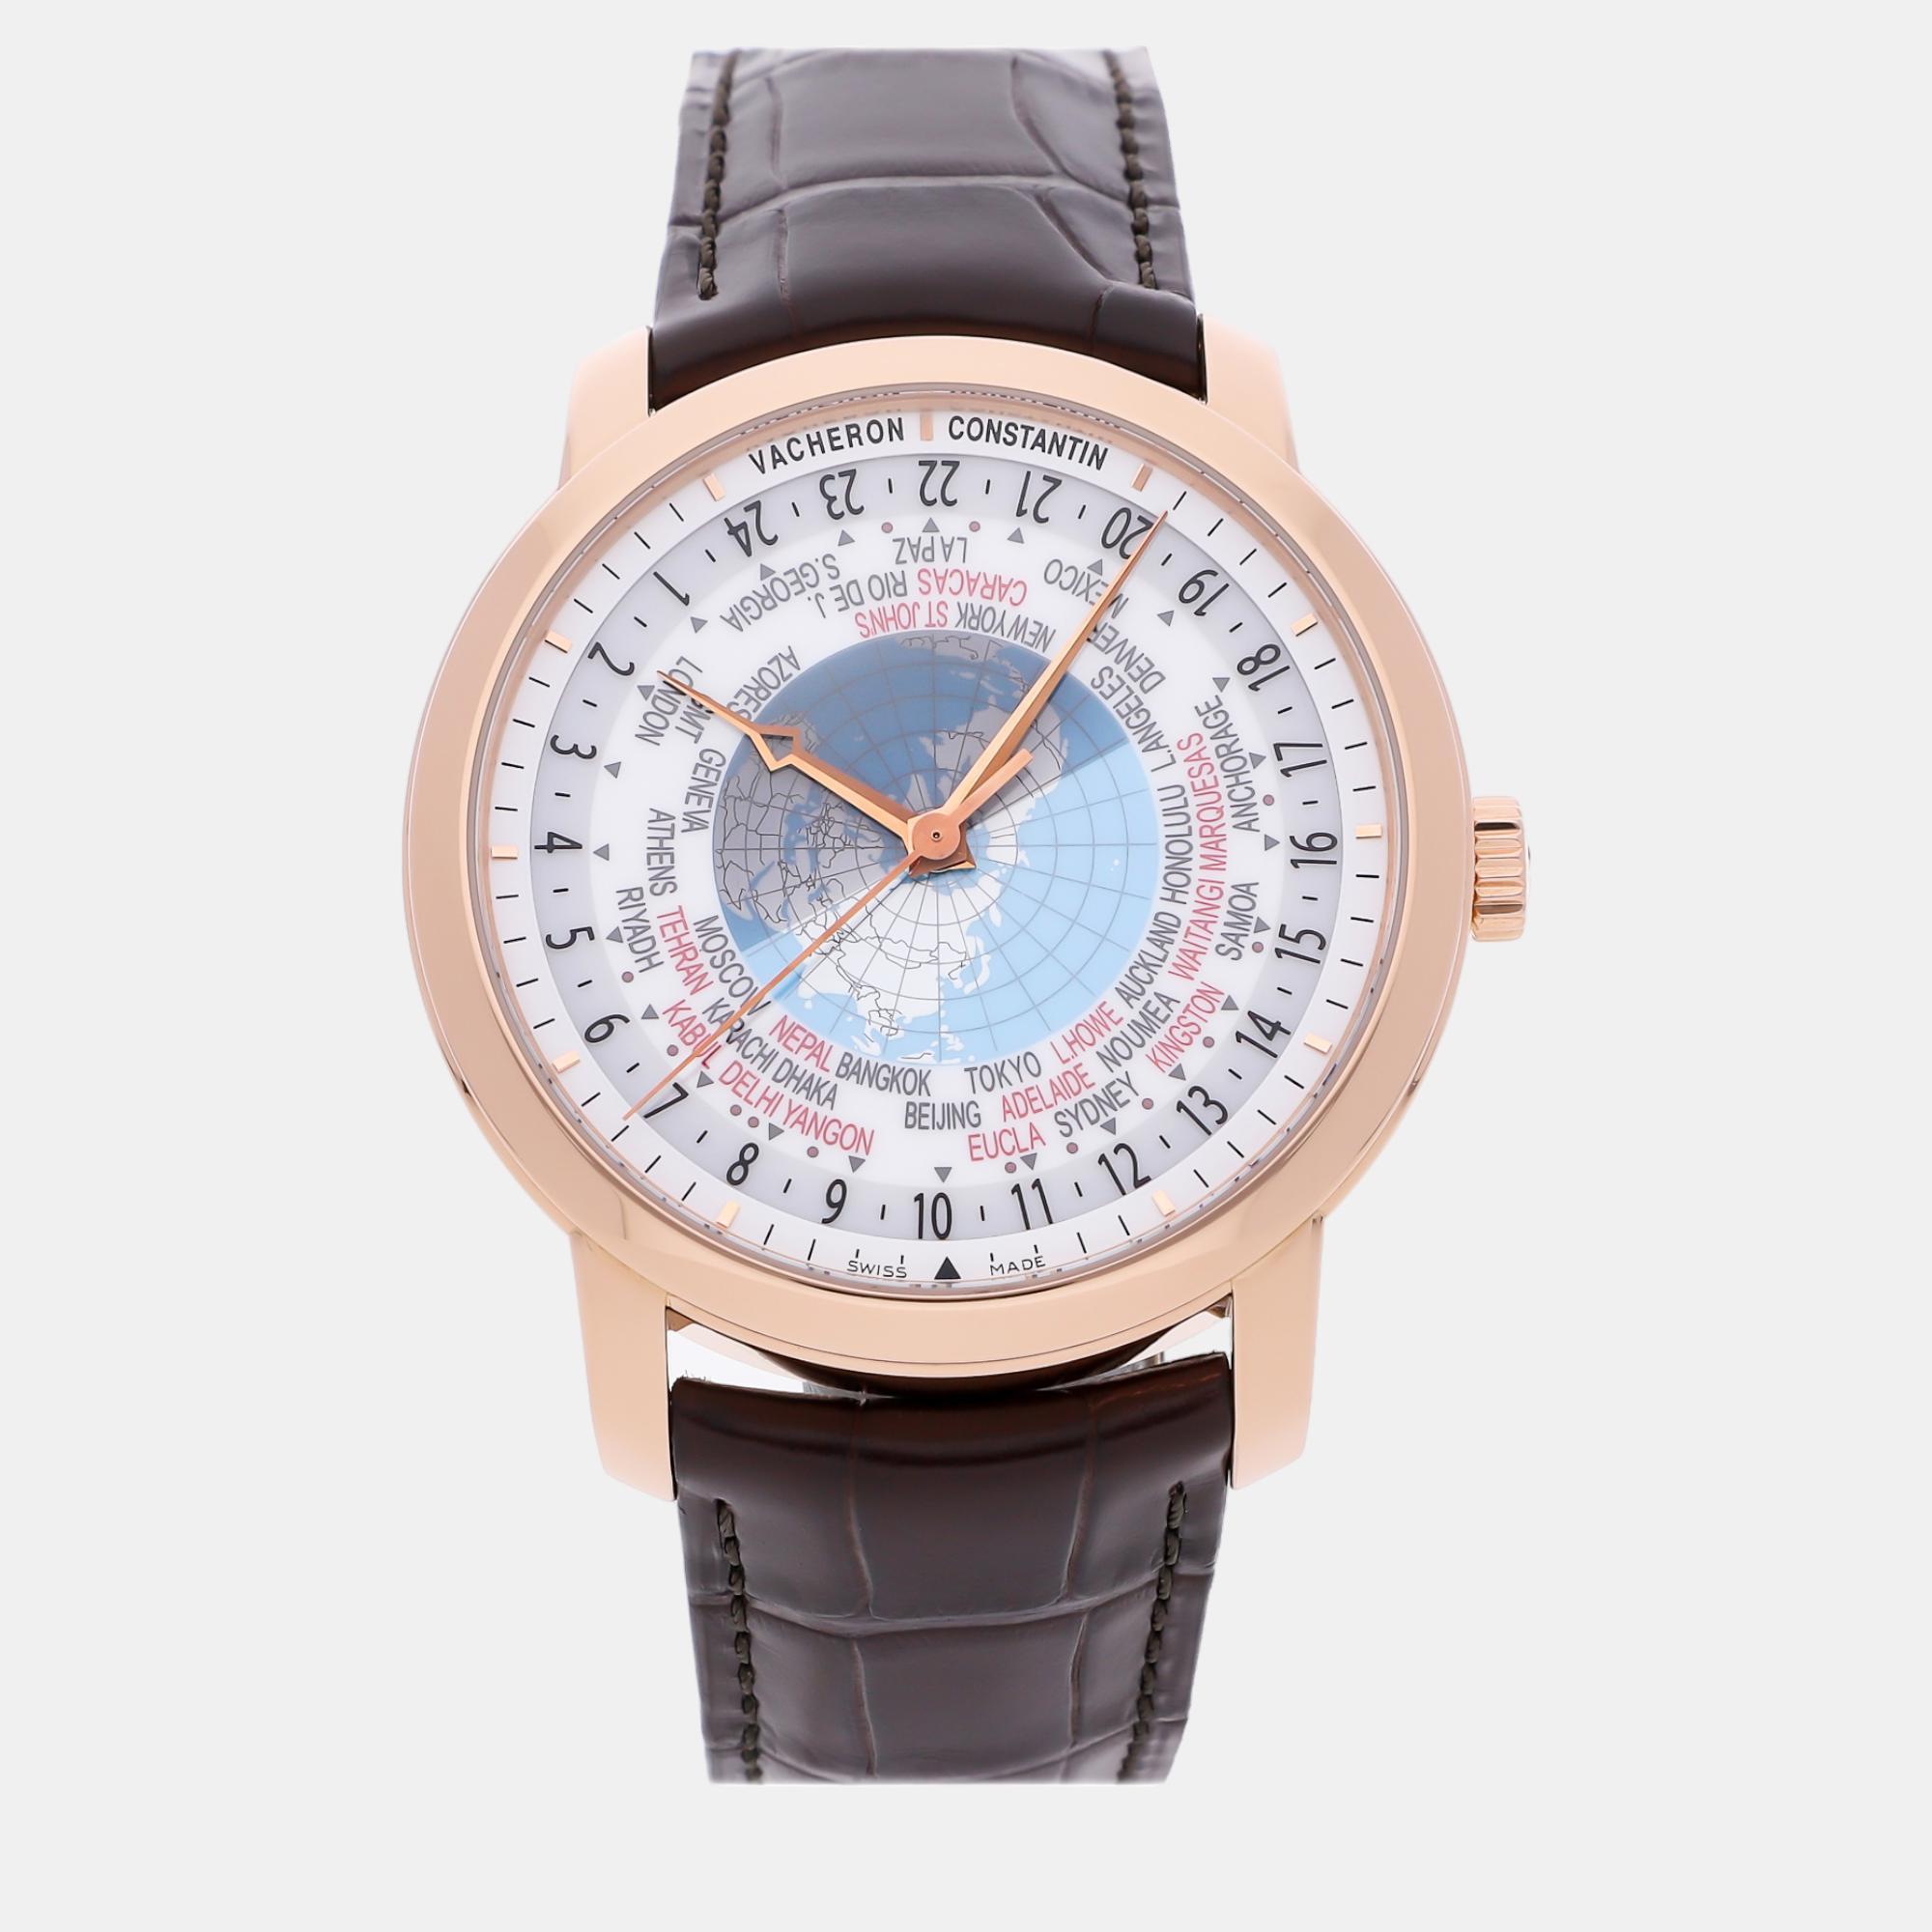 Sophisticated design and traditions of fine watchmaking characterize this authentic designer timepiece. Grace your wrist with this luxurious piece and instantly elevate your day.